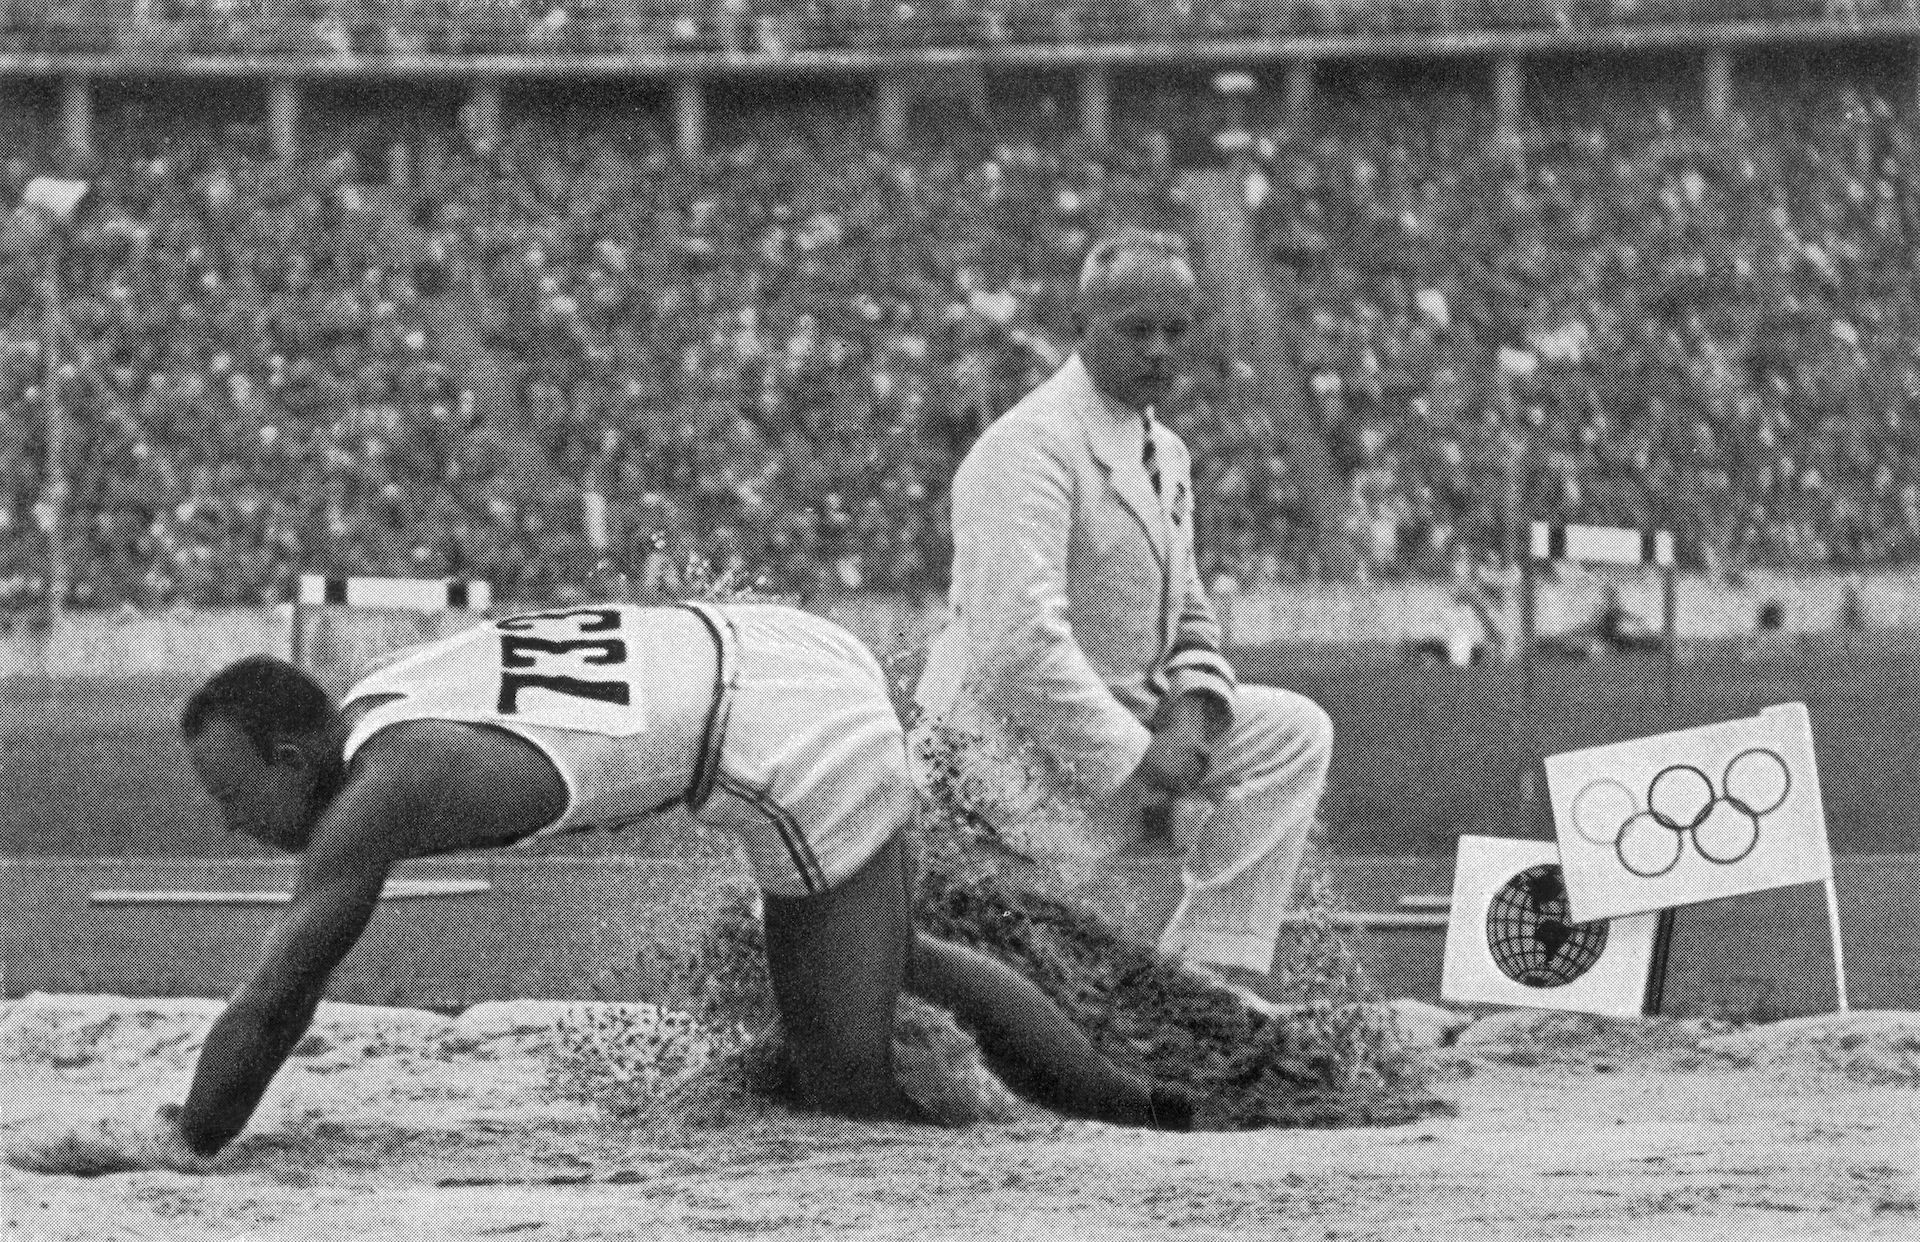 Jesse Owens to be honoured with World Athletics Heritage Plaque